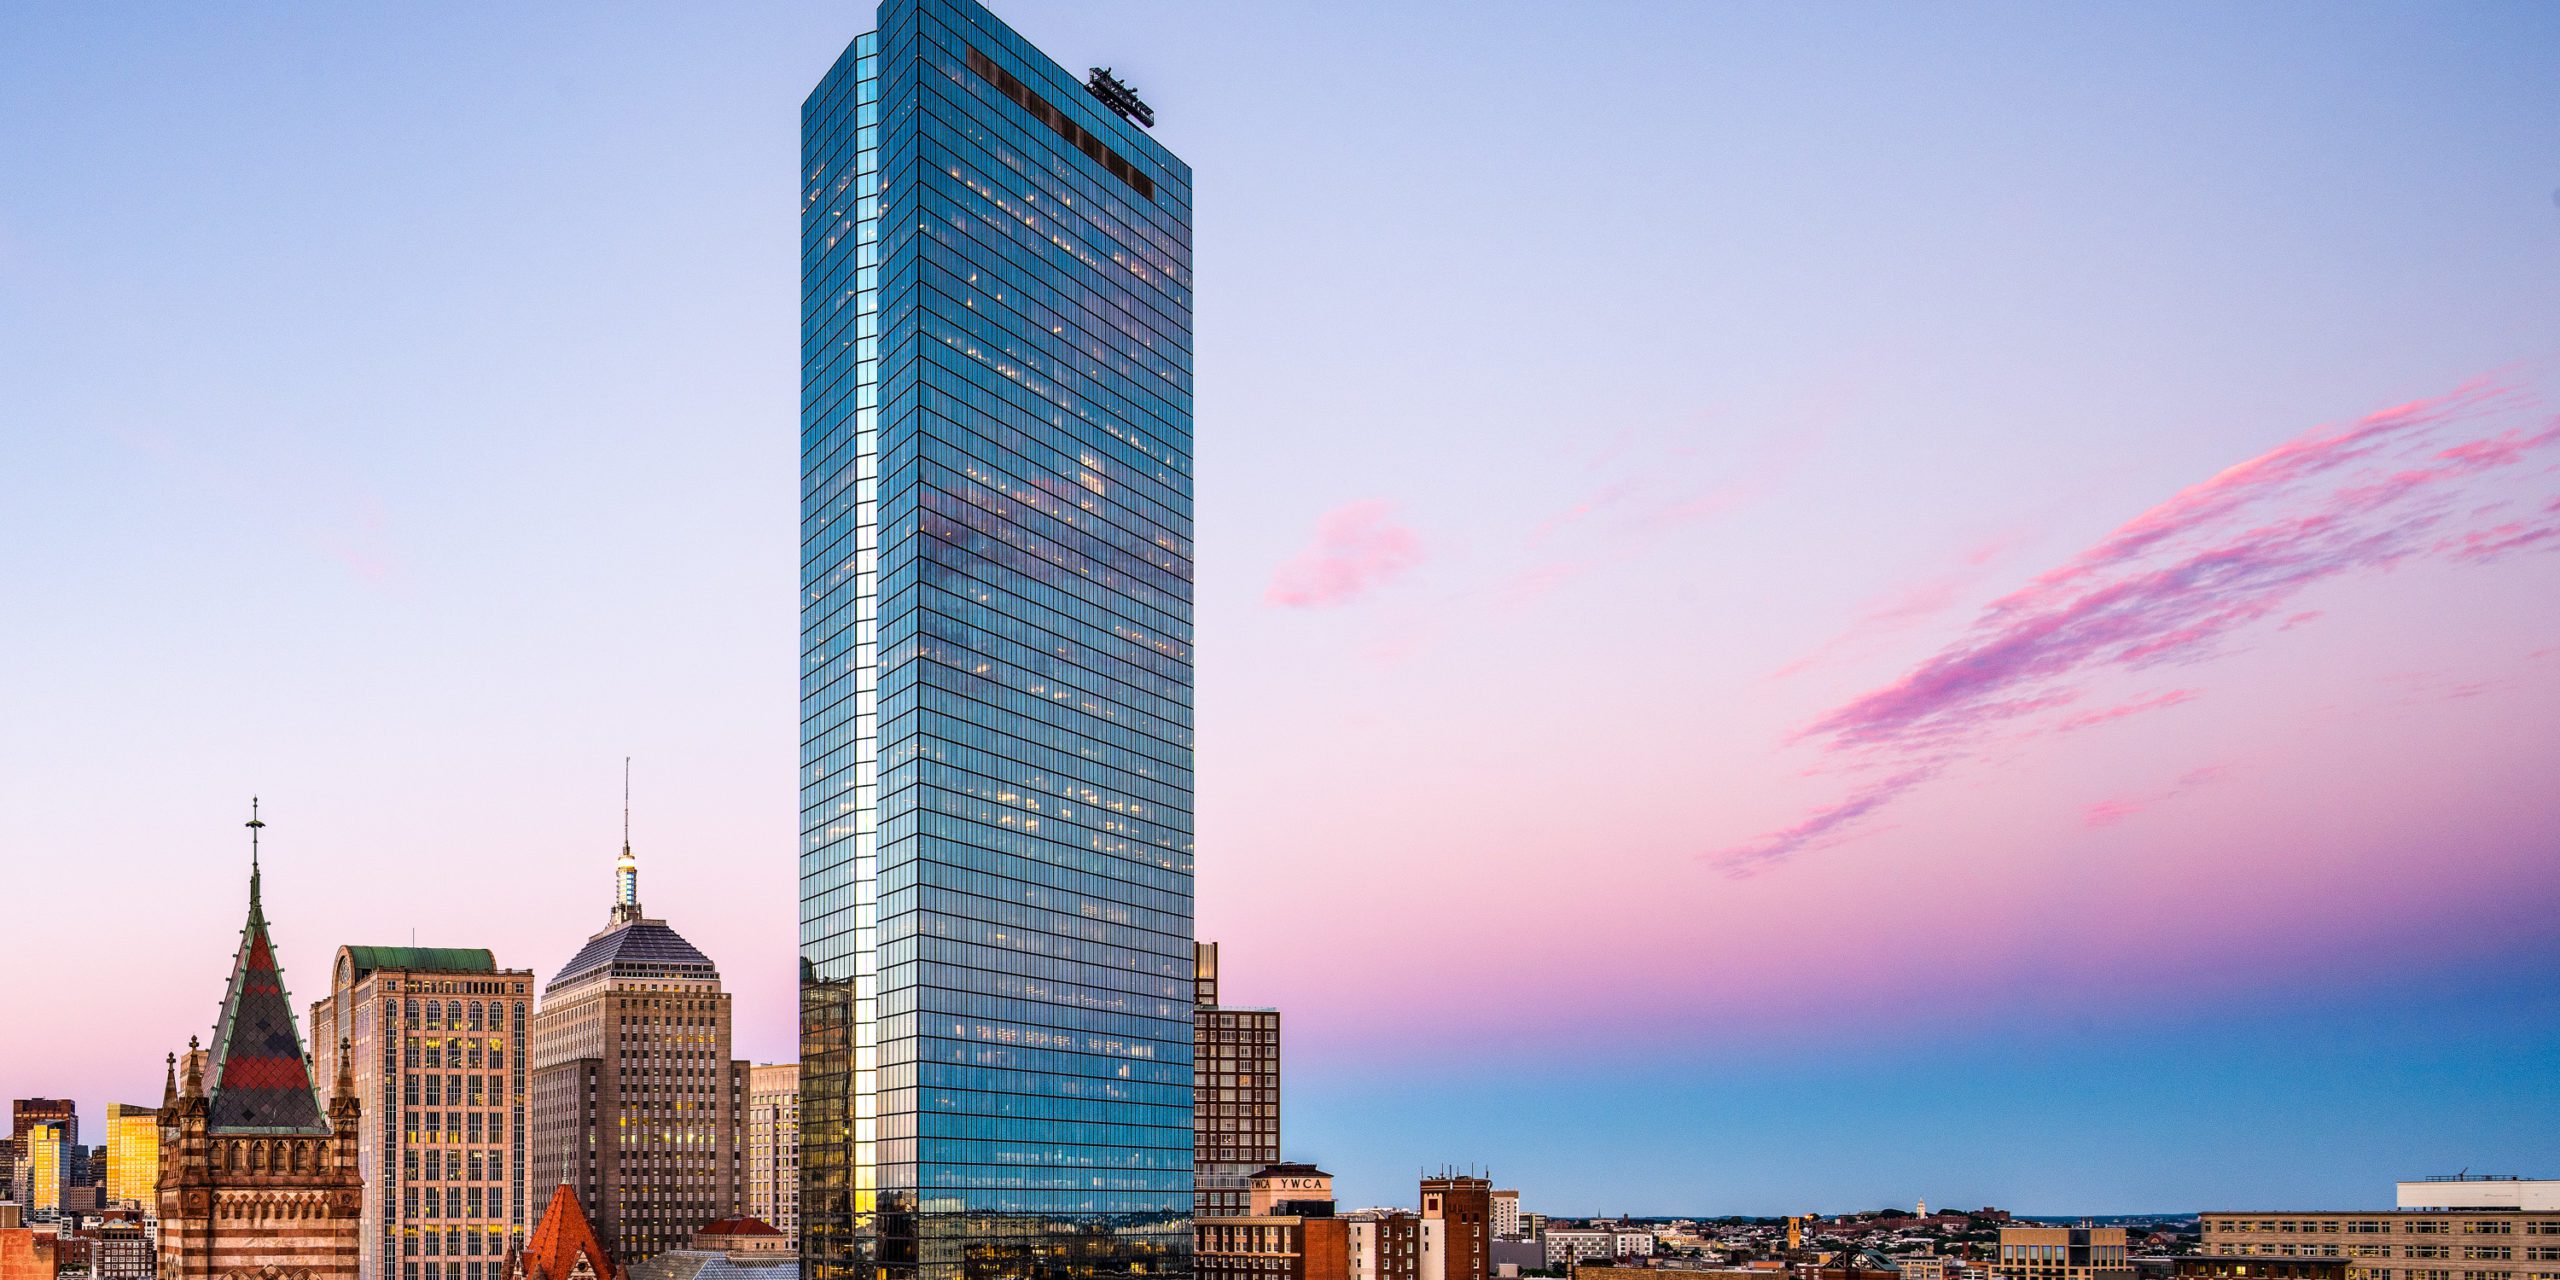 200 Clarendon Street featured at sunset.